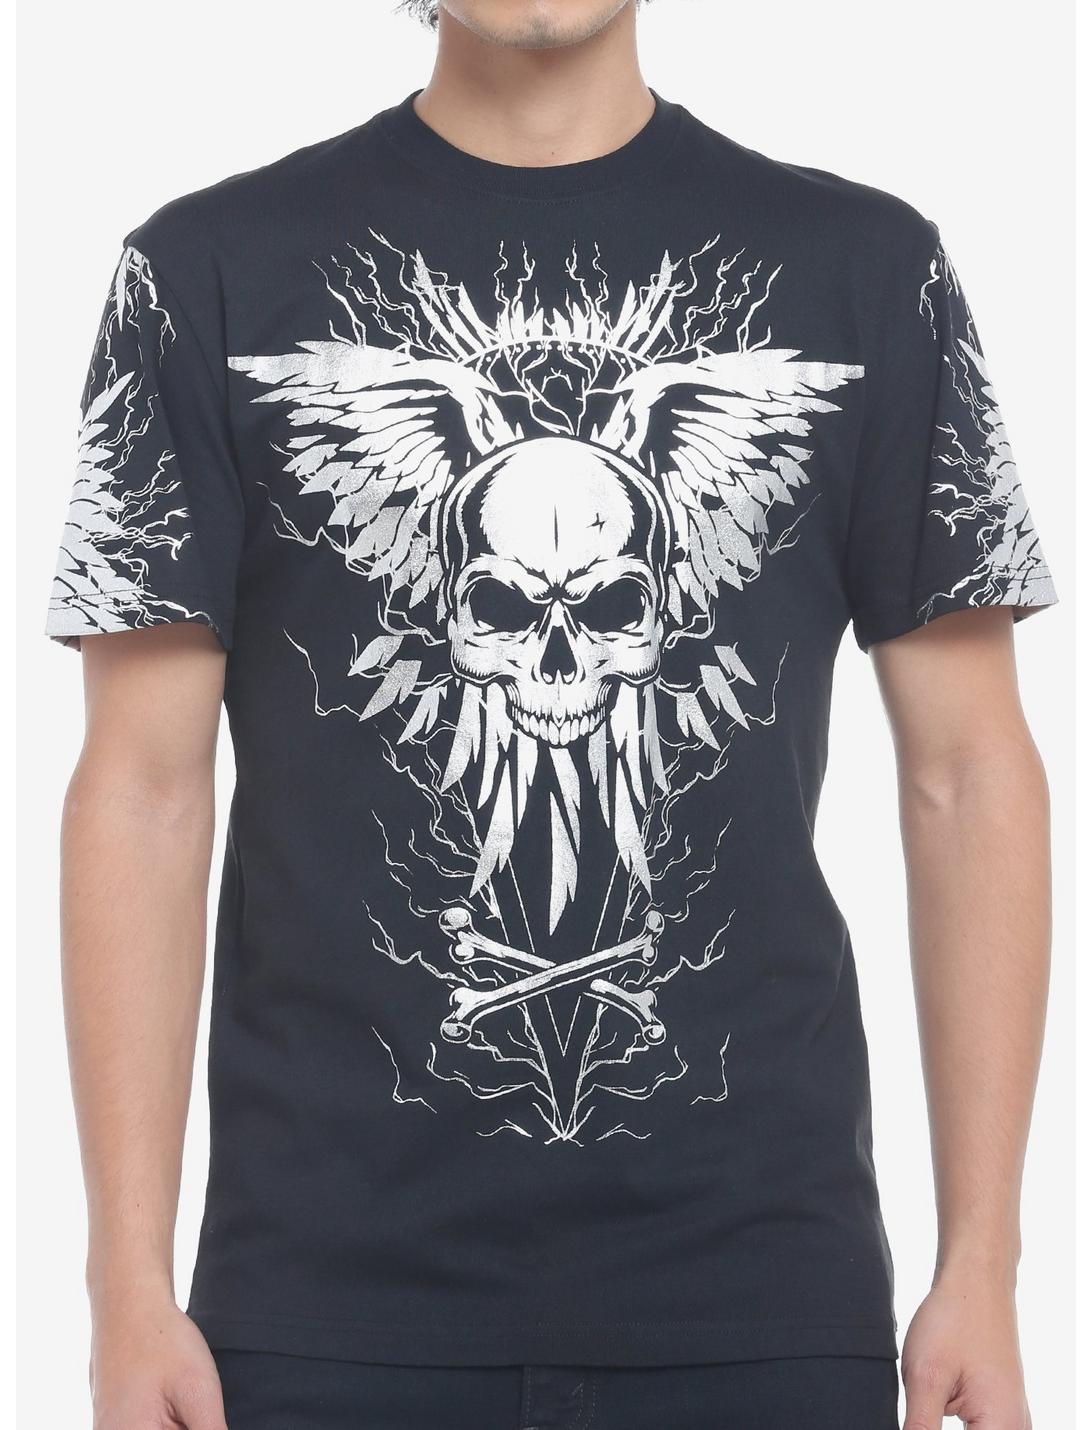 Silver Skull With Wings T-Shirt, BLACK  RED, hi-res